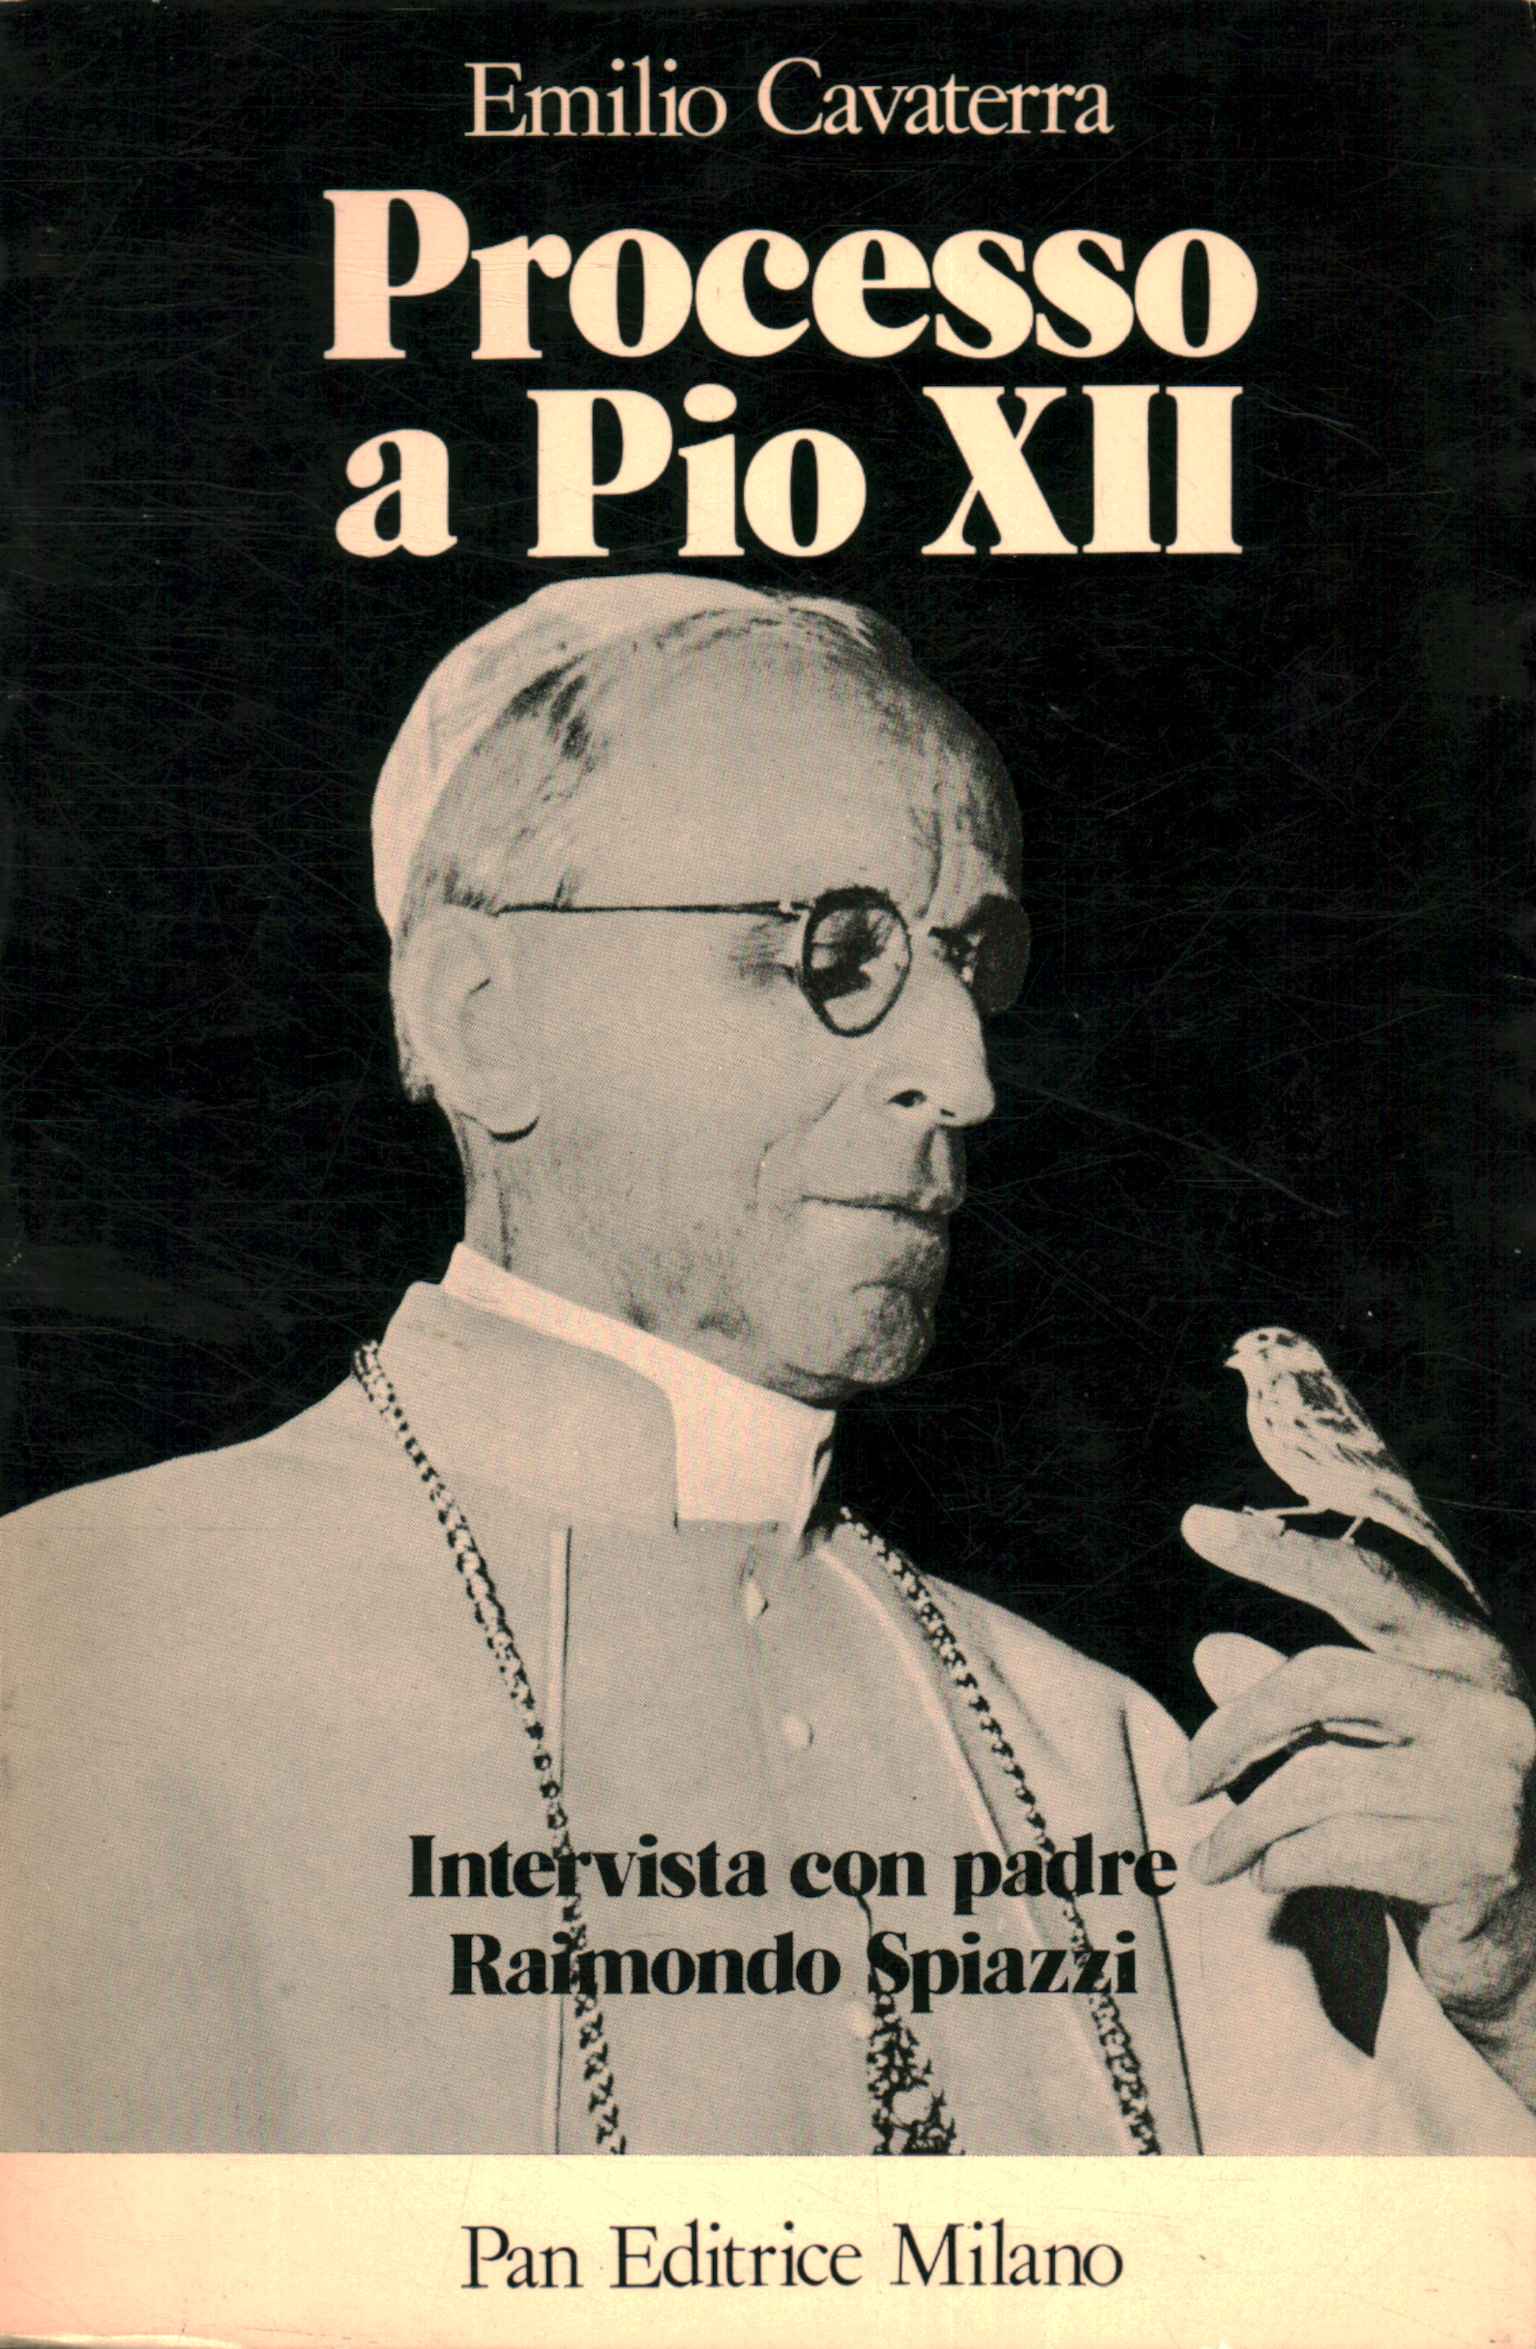 Trial of Pius XII